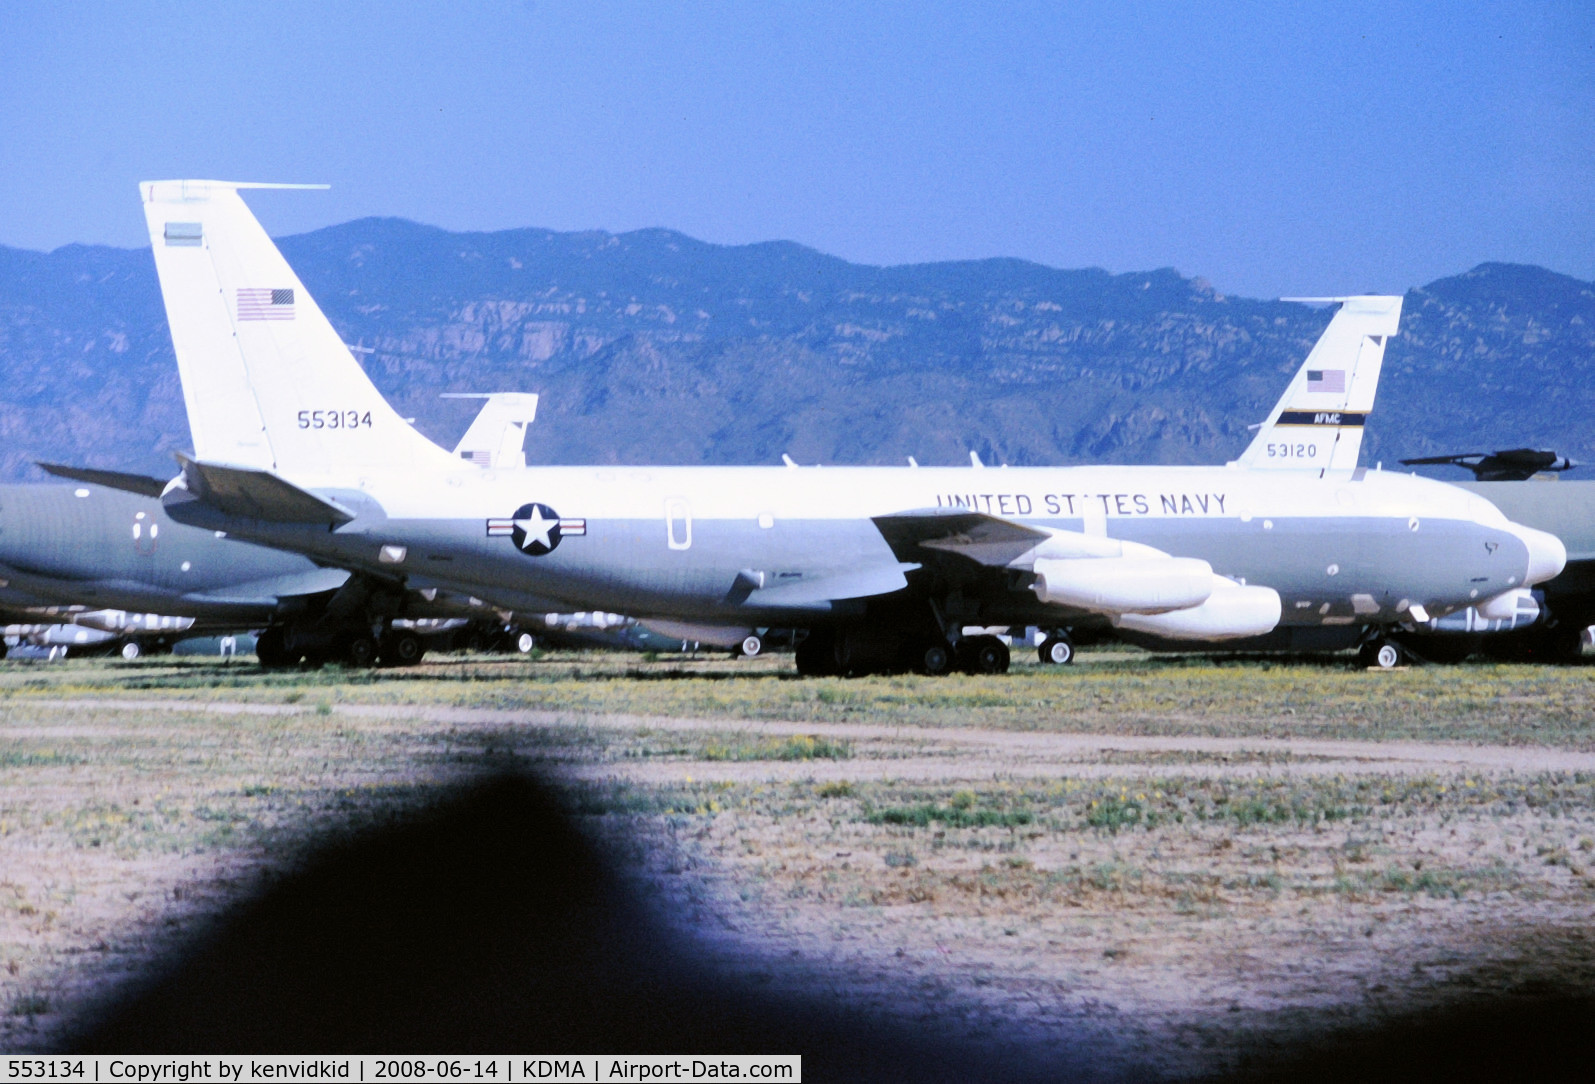 553134, 1955 Boeing NKC-135A Stratotanker C/N 17250, At Davis Monthan from an air-conditioned bus, circa 1996.